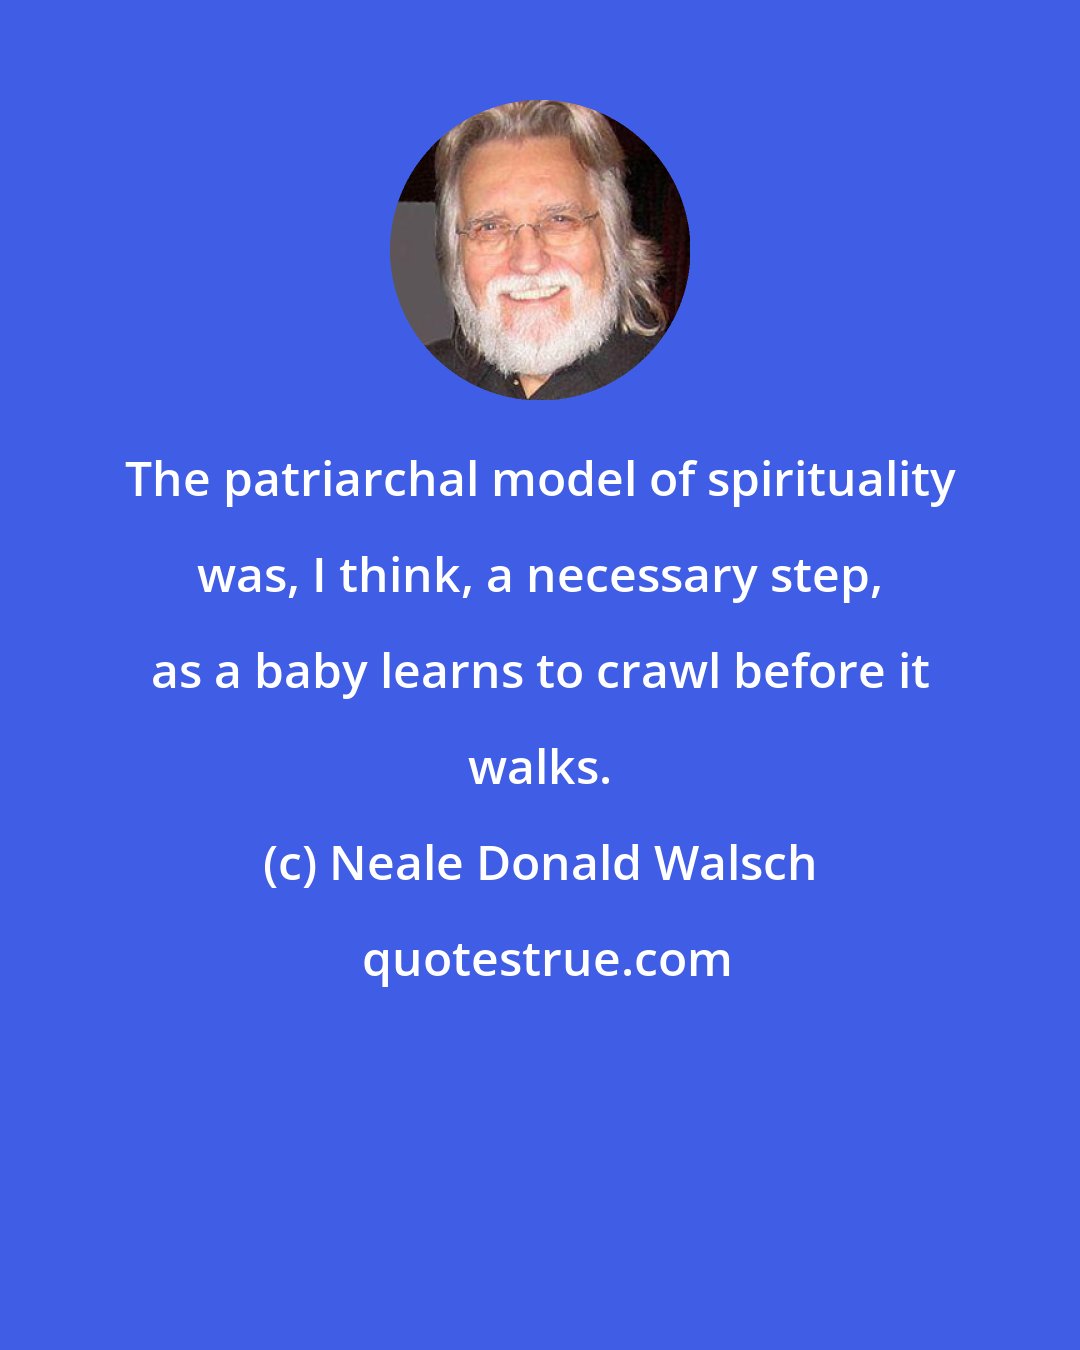 Neale Donald Walsch: The patriarchal model of spirituality was, I think, a necessary step, as a baby learns to crawl before it walks.